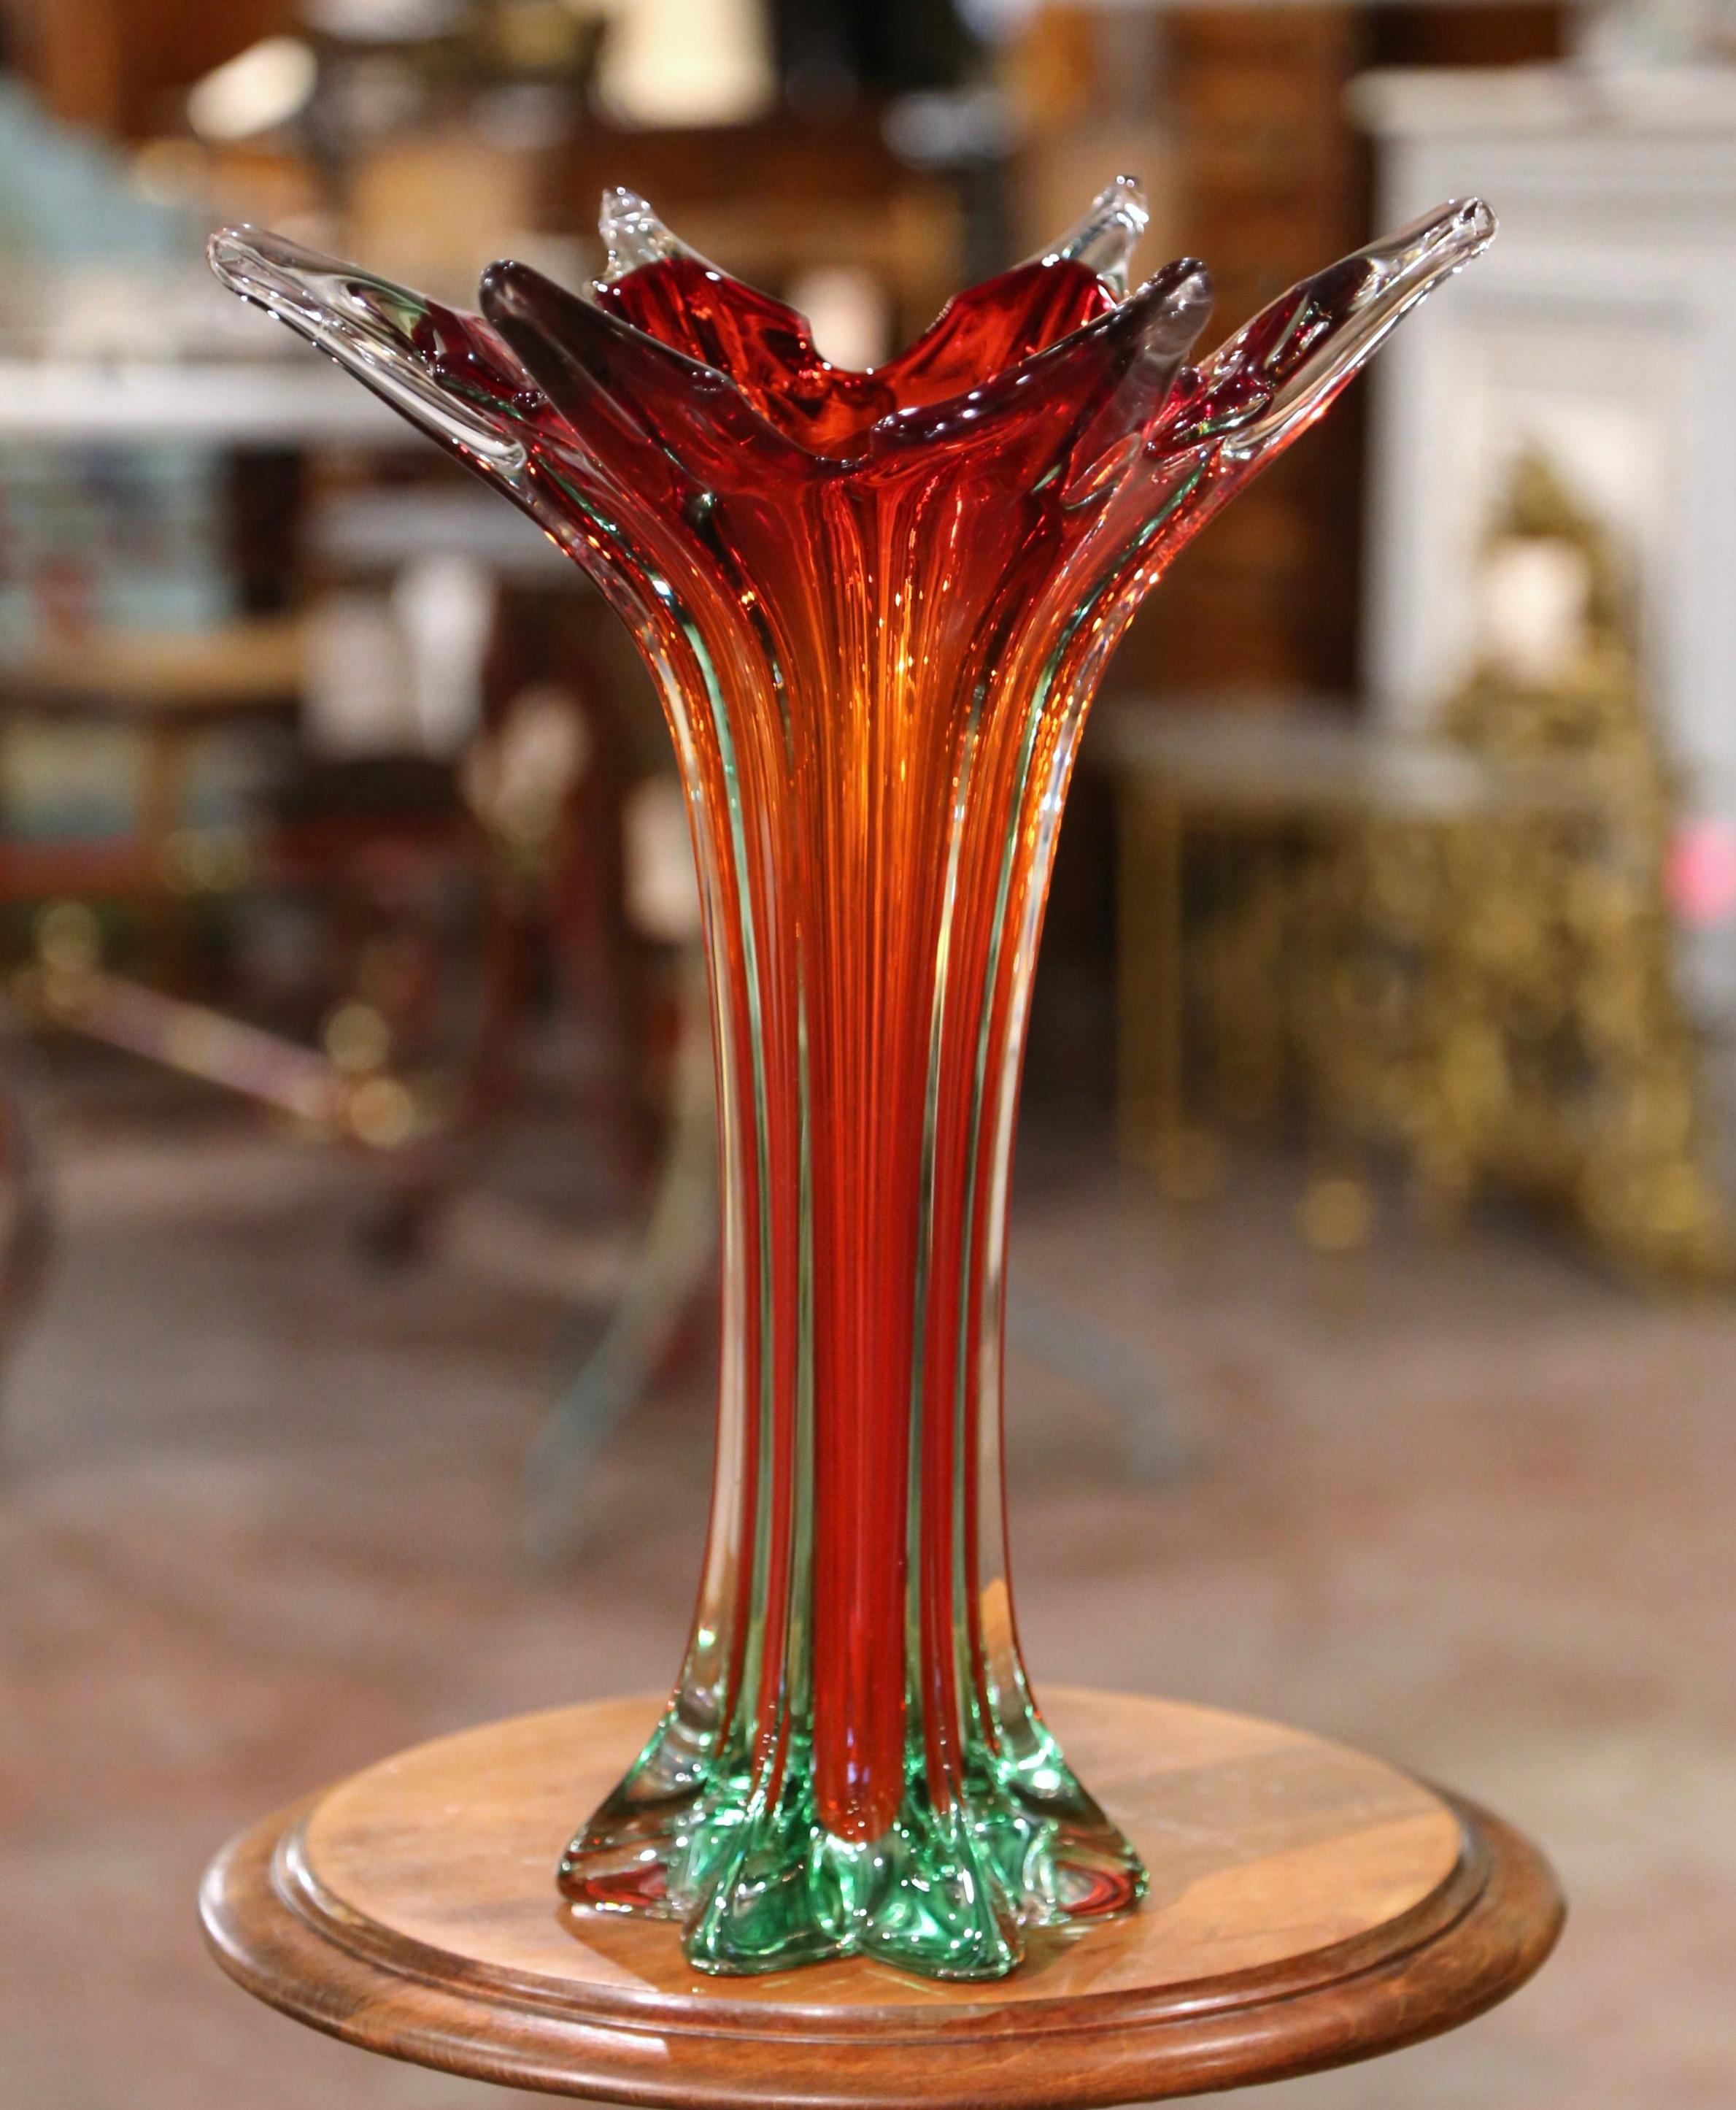 This elegant, hand blown glass console vase was crafted in Italy, circa 1950. The vintage piece attributed to Murano has a cred color center and features a pulled feathered technique with an intricate curl design in red and clear palette. The tall